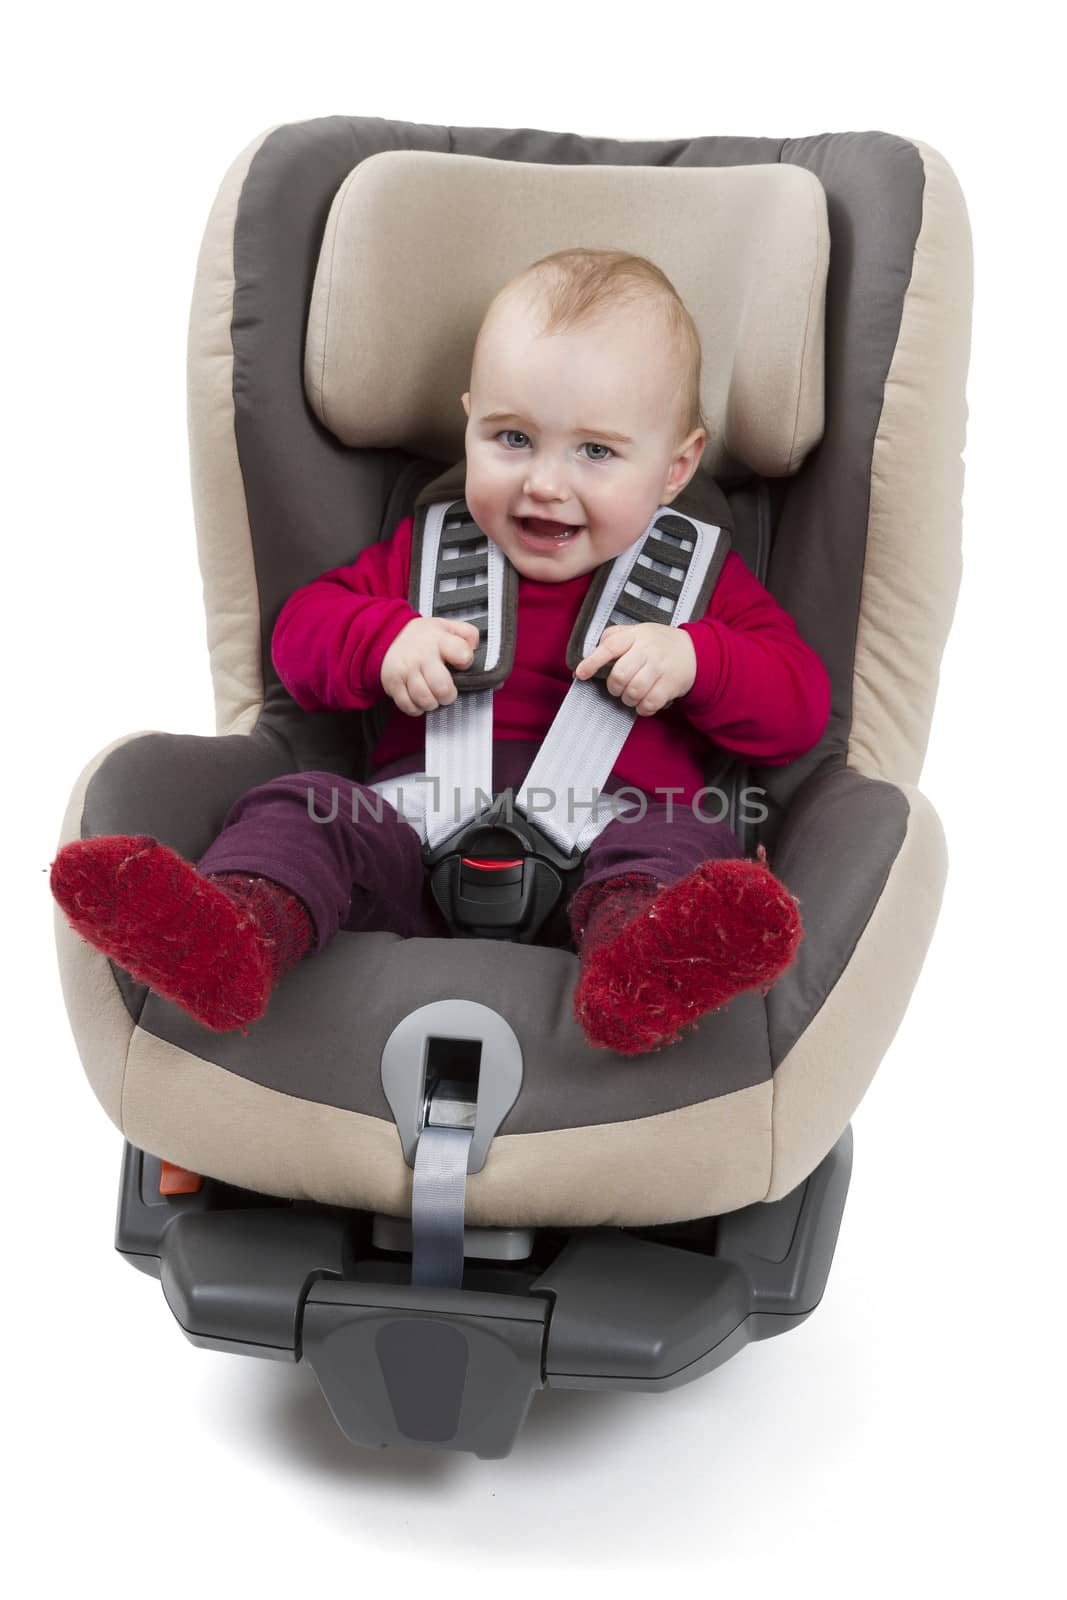 child in booster seat for a car in light background by gewoldi